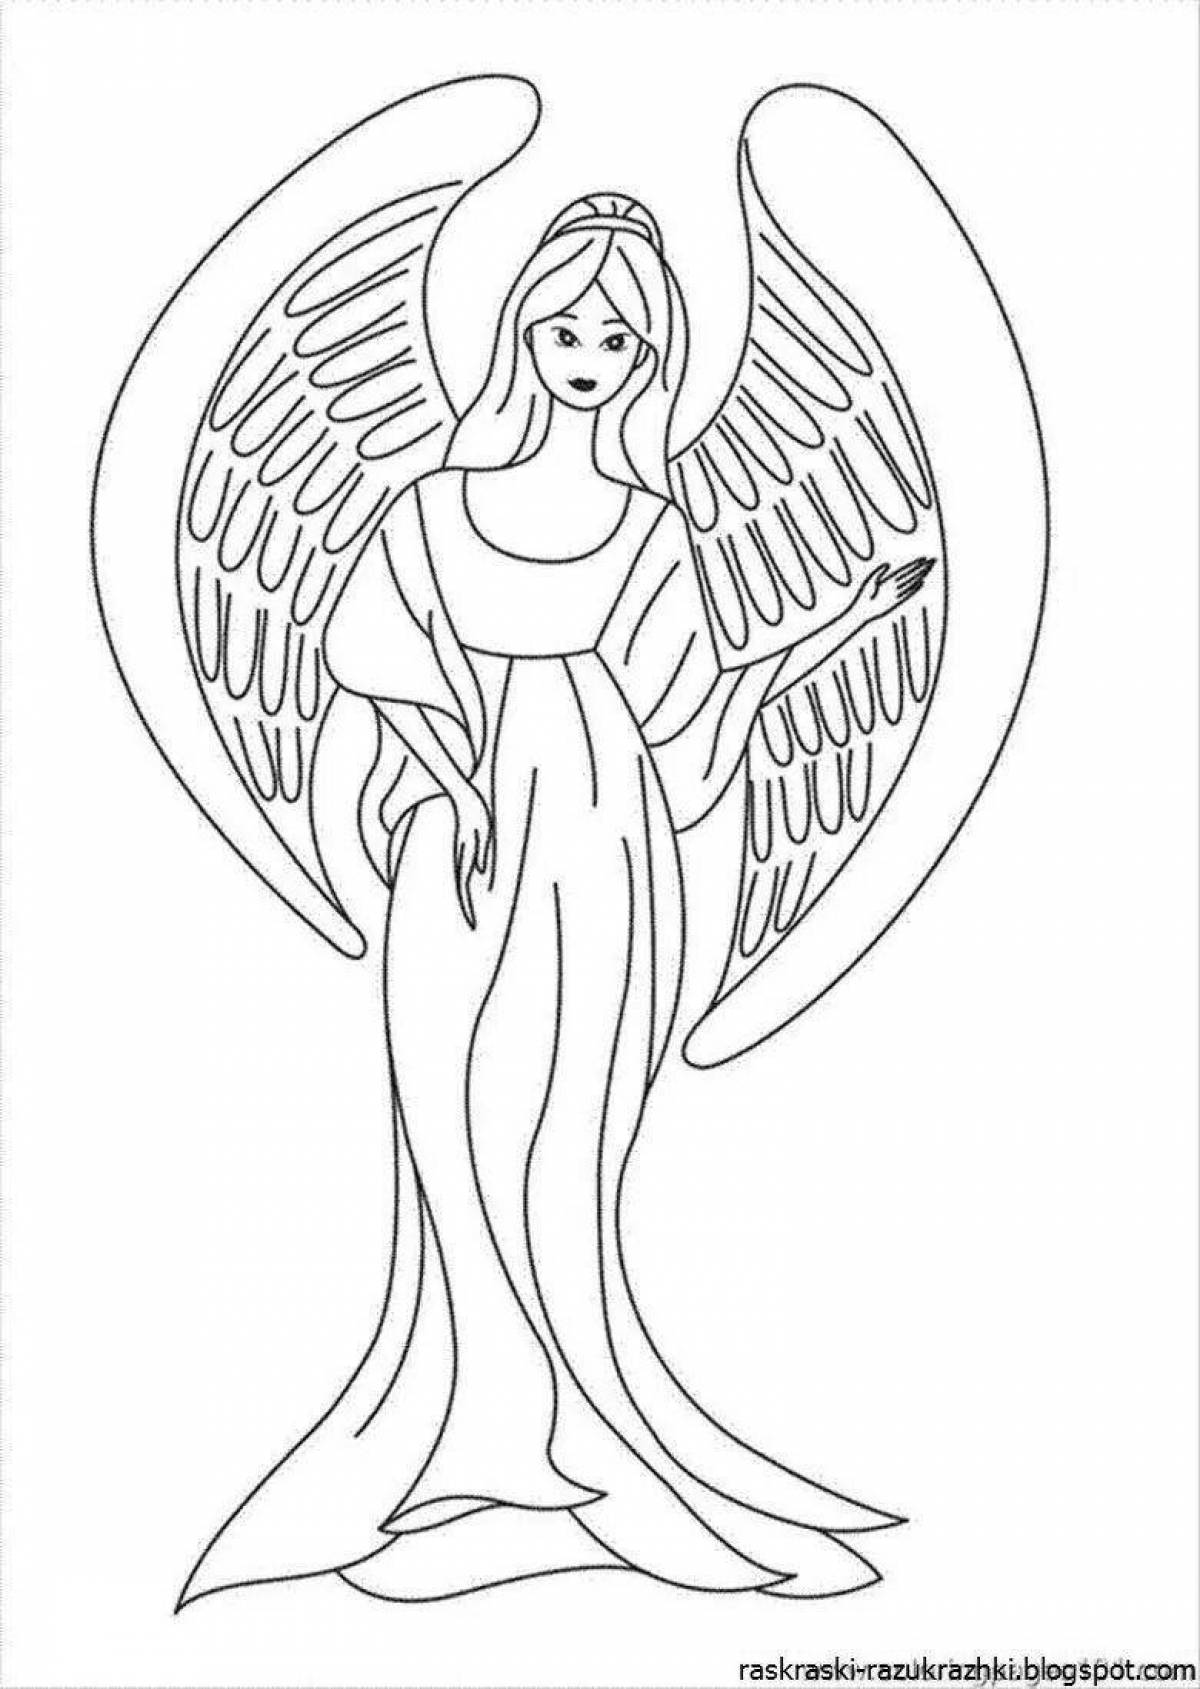 Majestic guardian angel coloring book